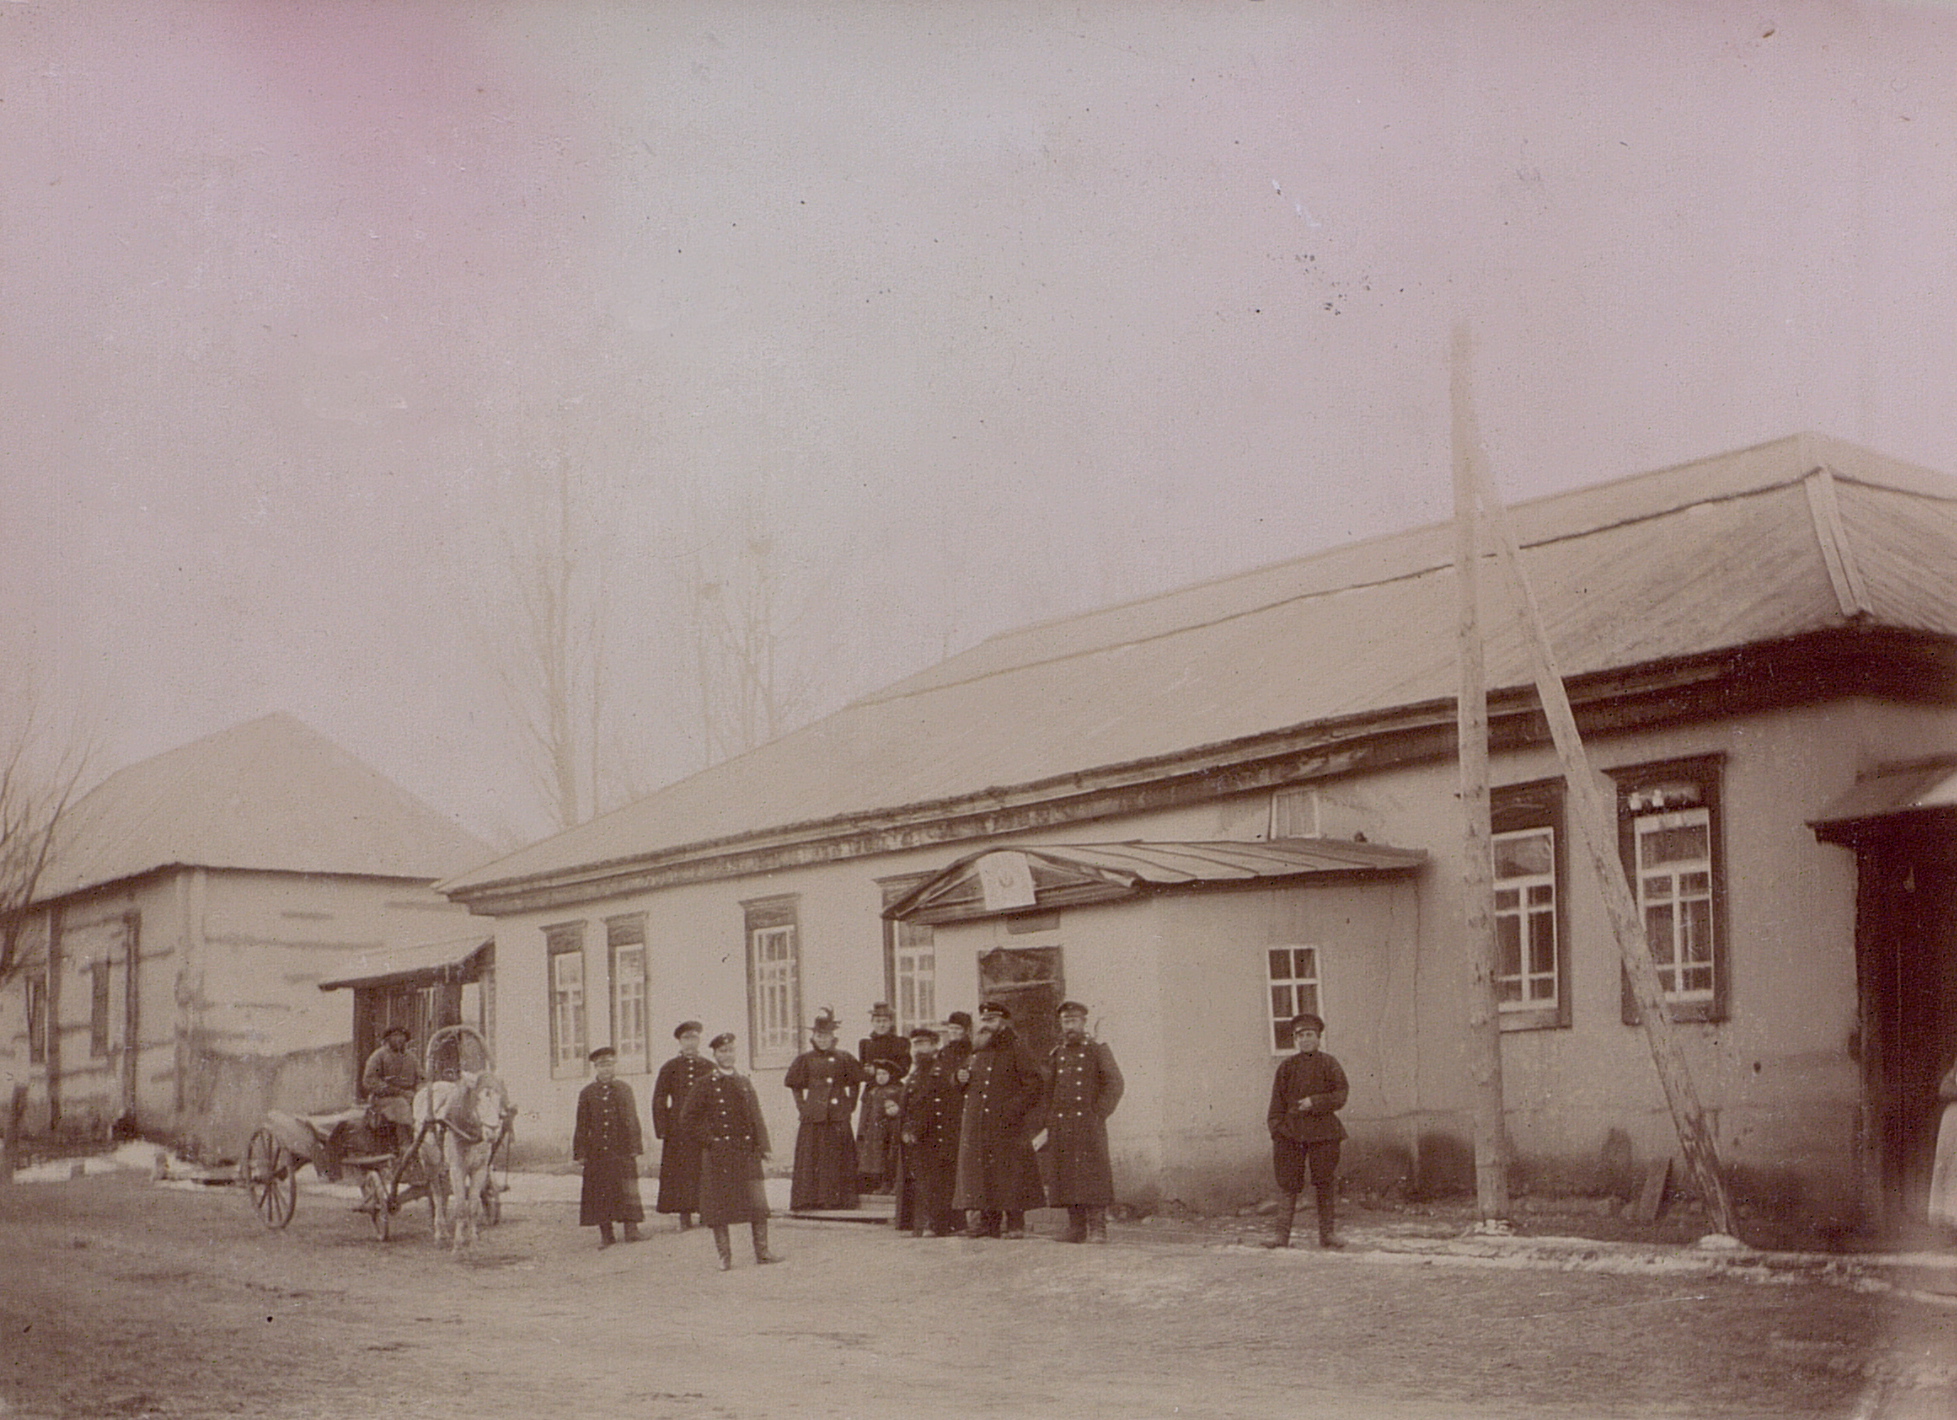 several men standing outside of a building with horses and carriages